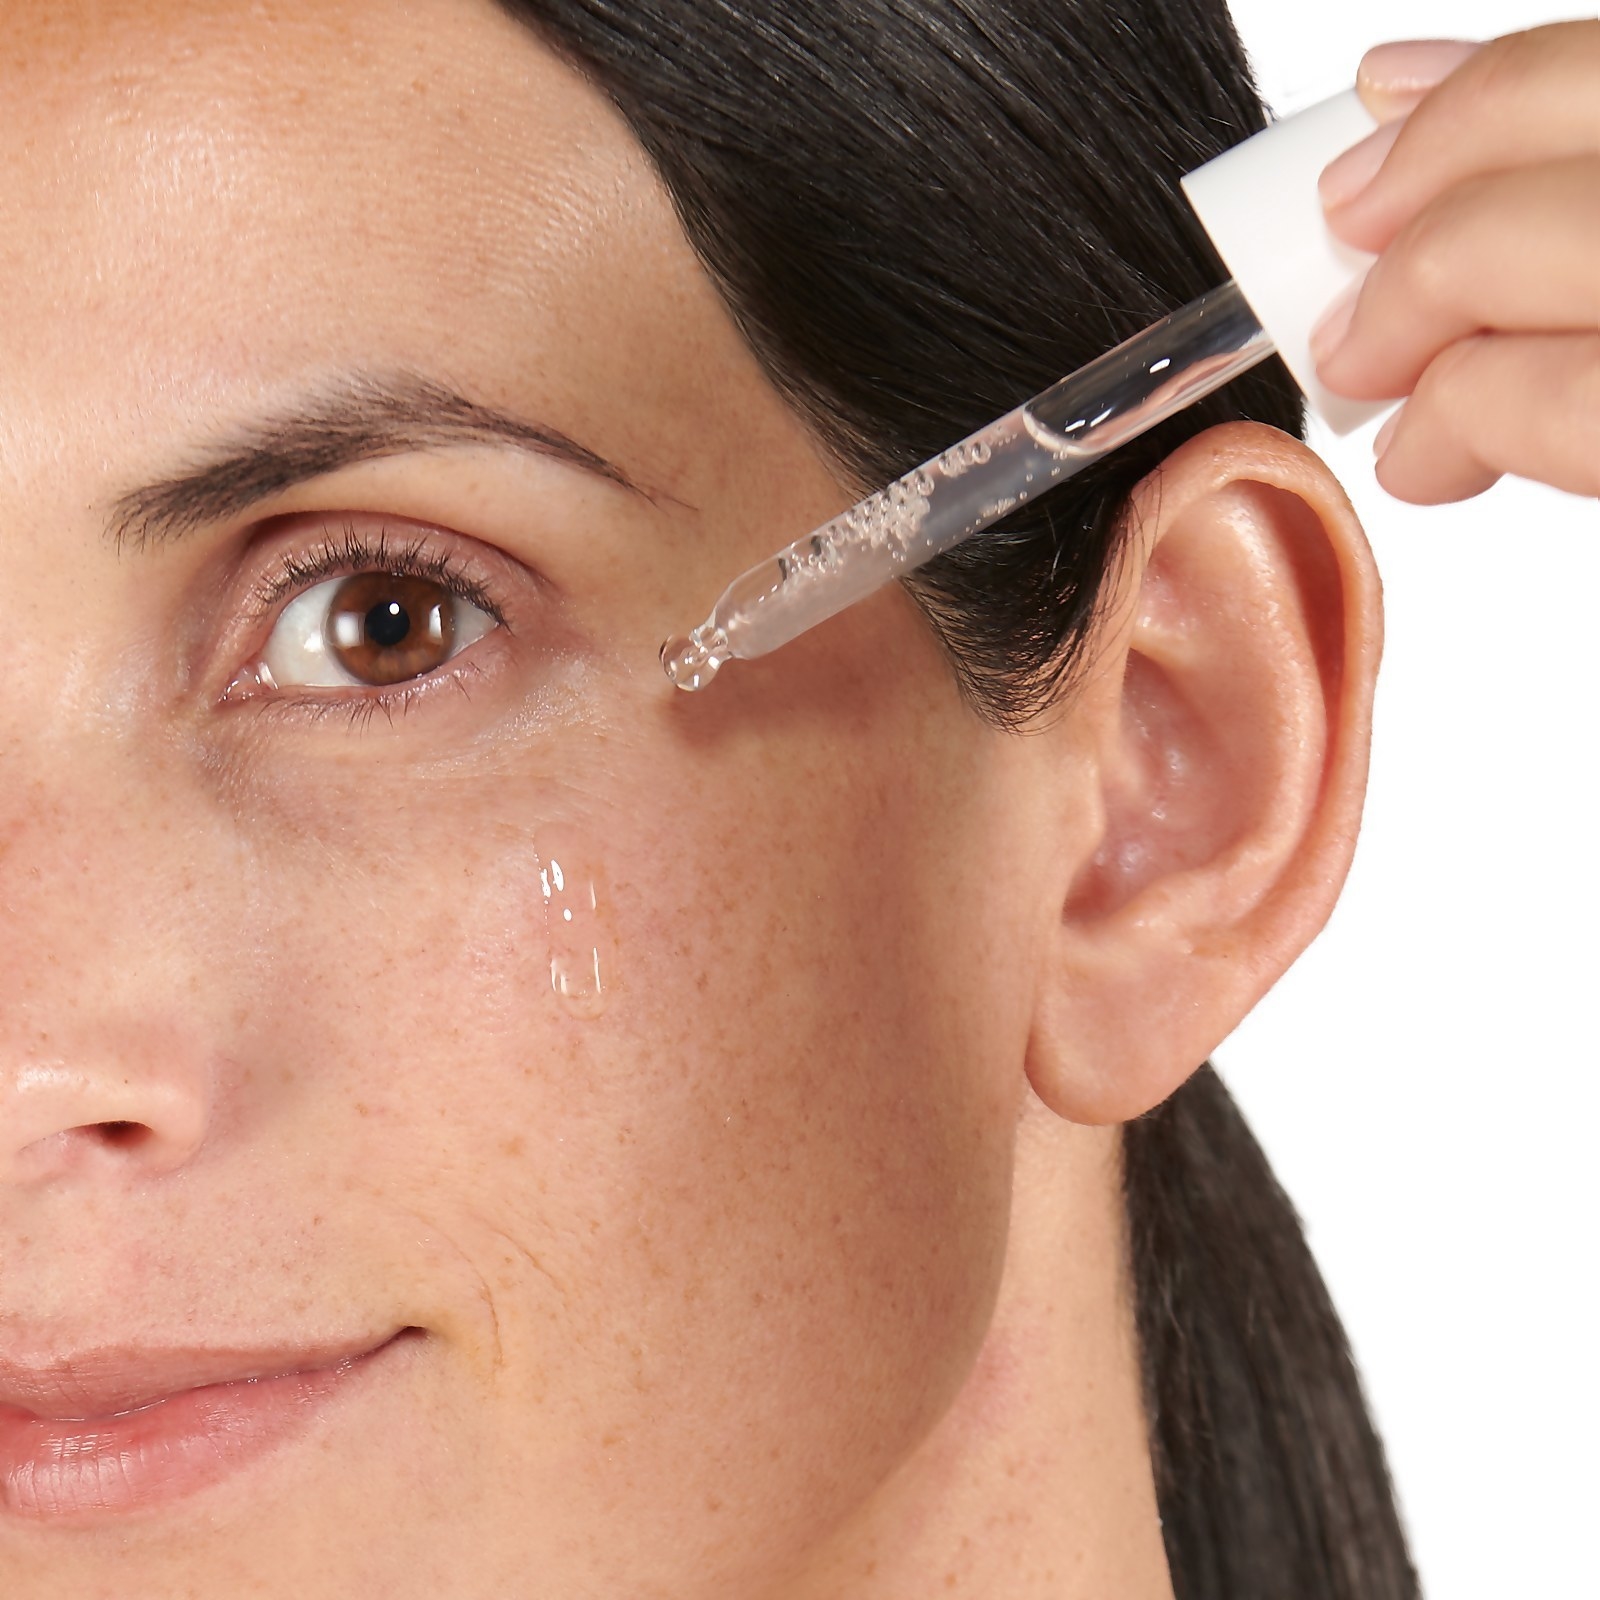 Model applying the clear product to their cheek with a dropper